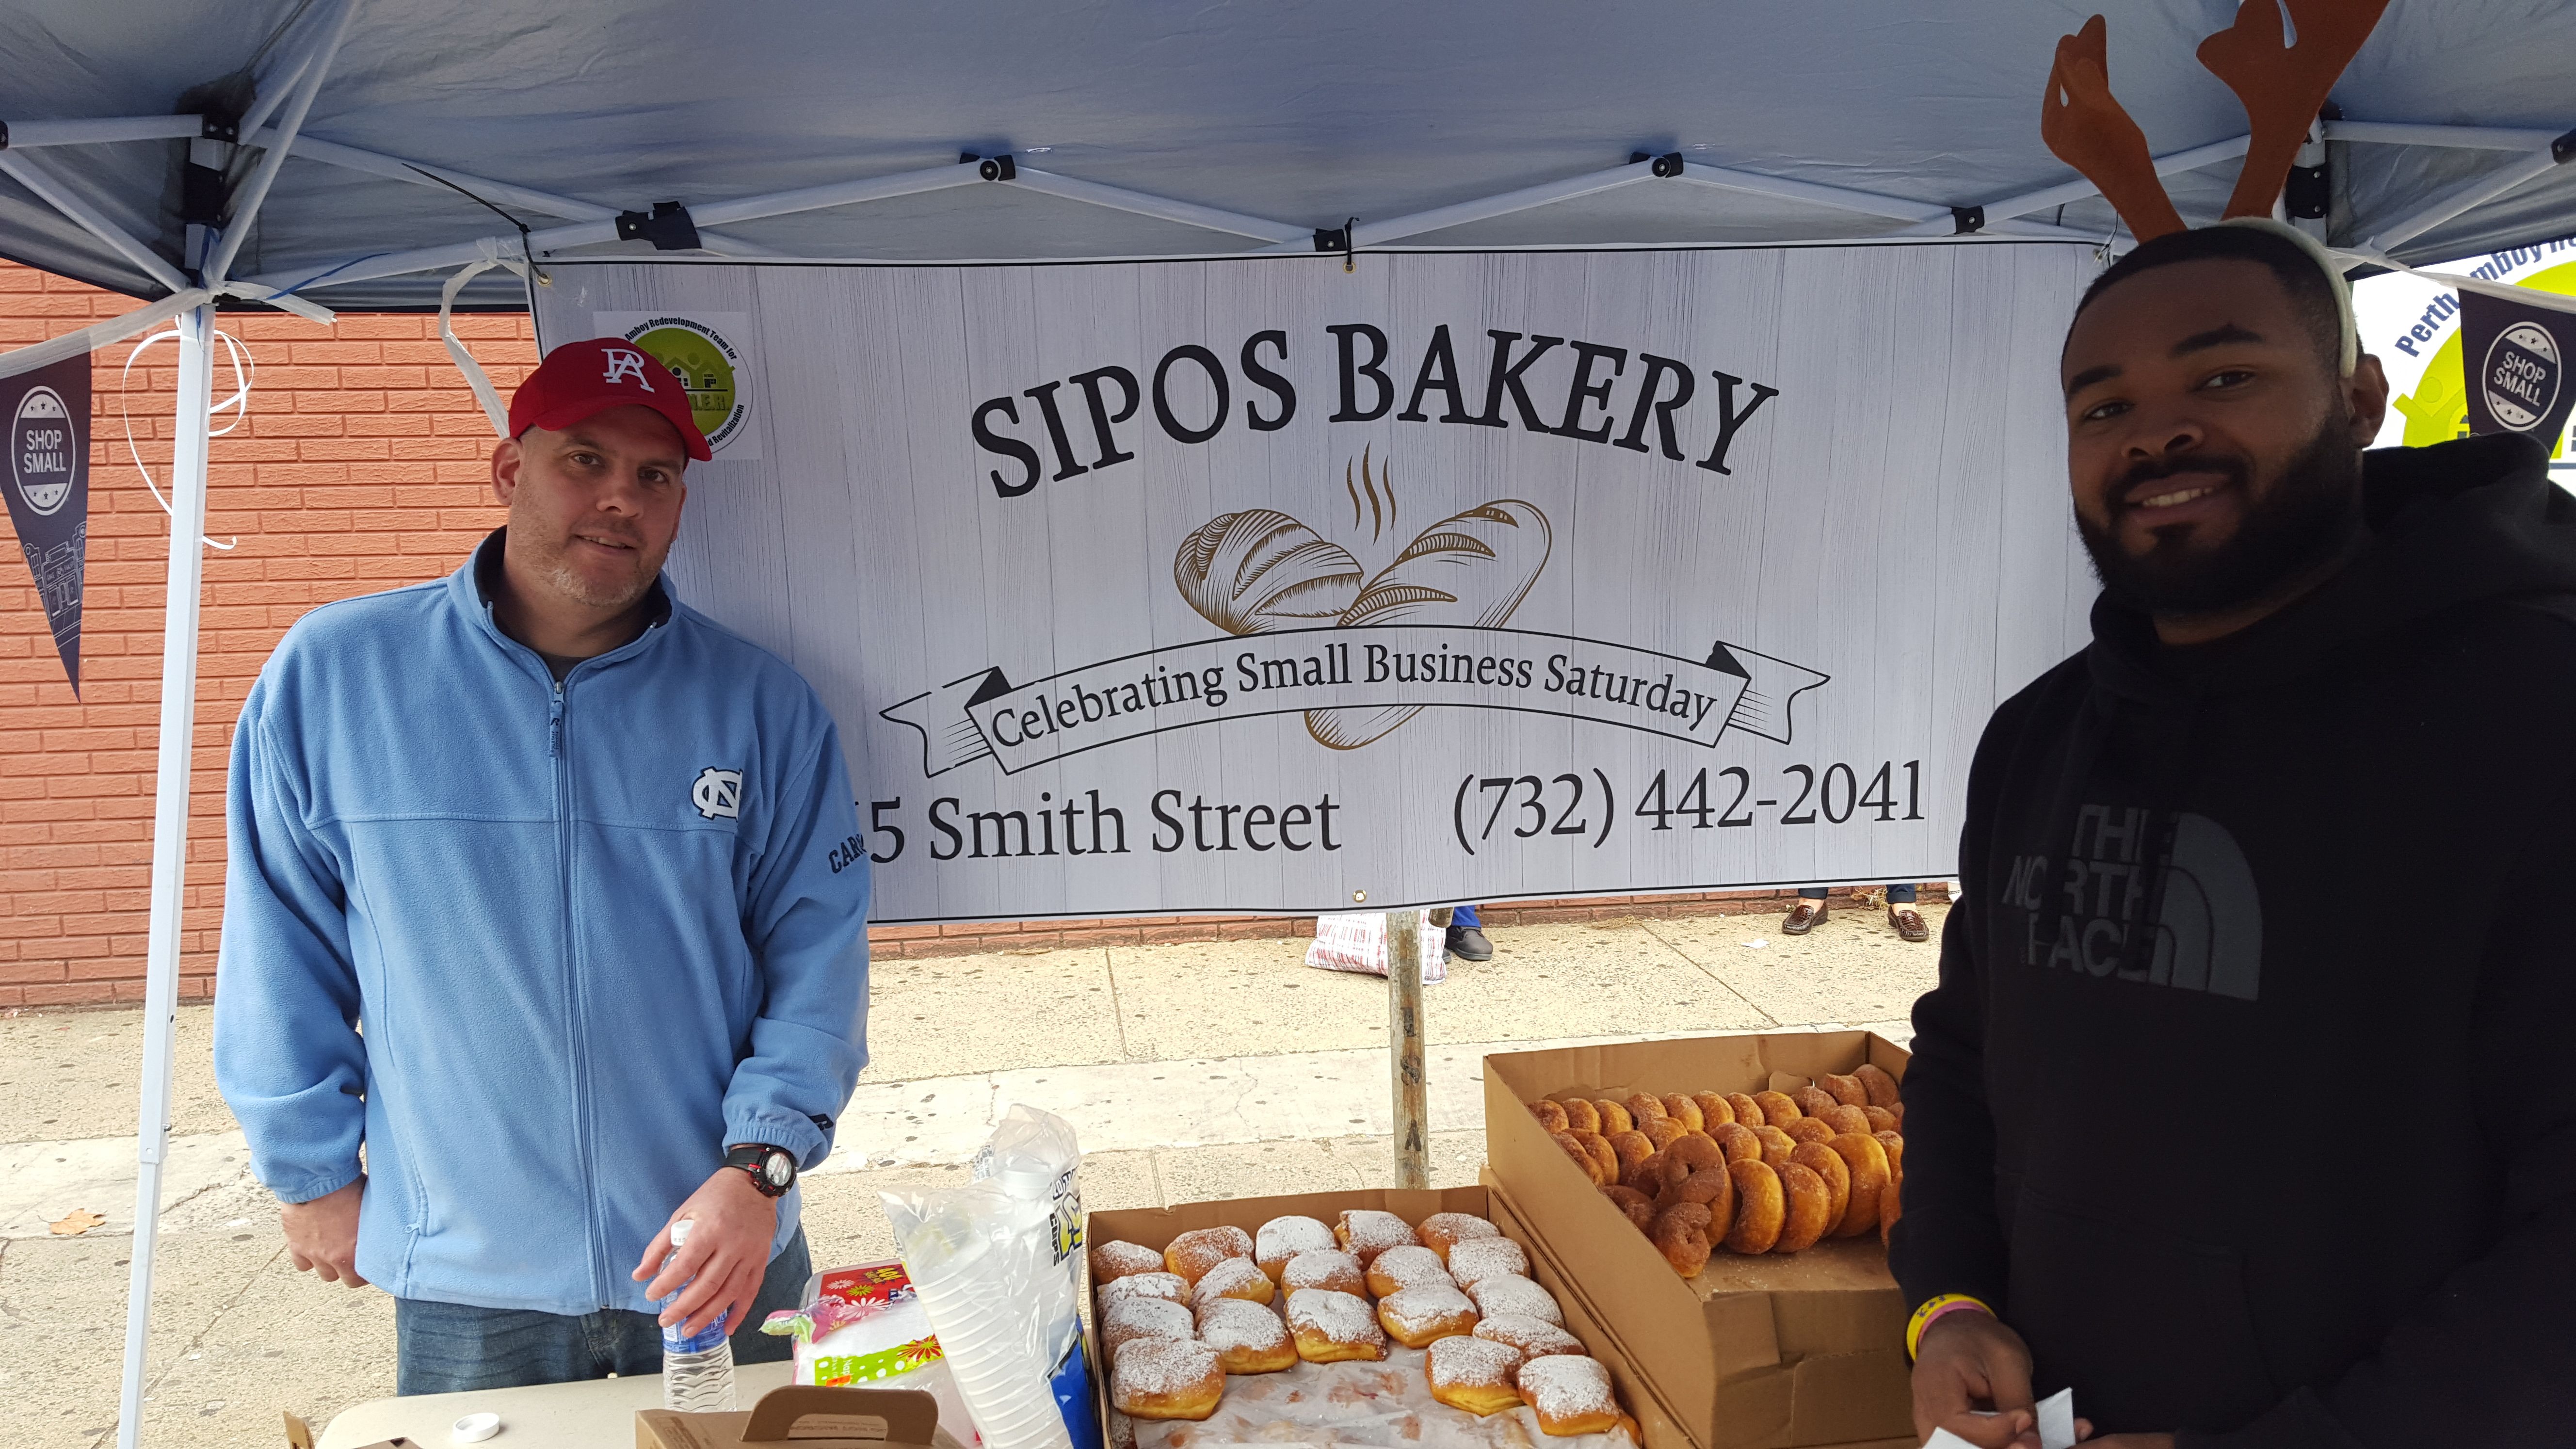 Sipos Bakery, GATEWAY Business at Small Business Saturday